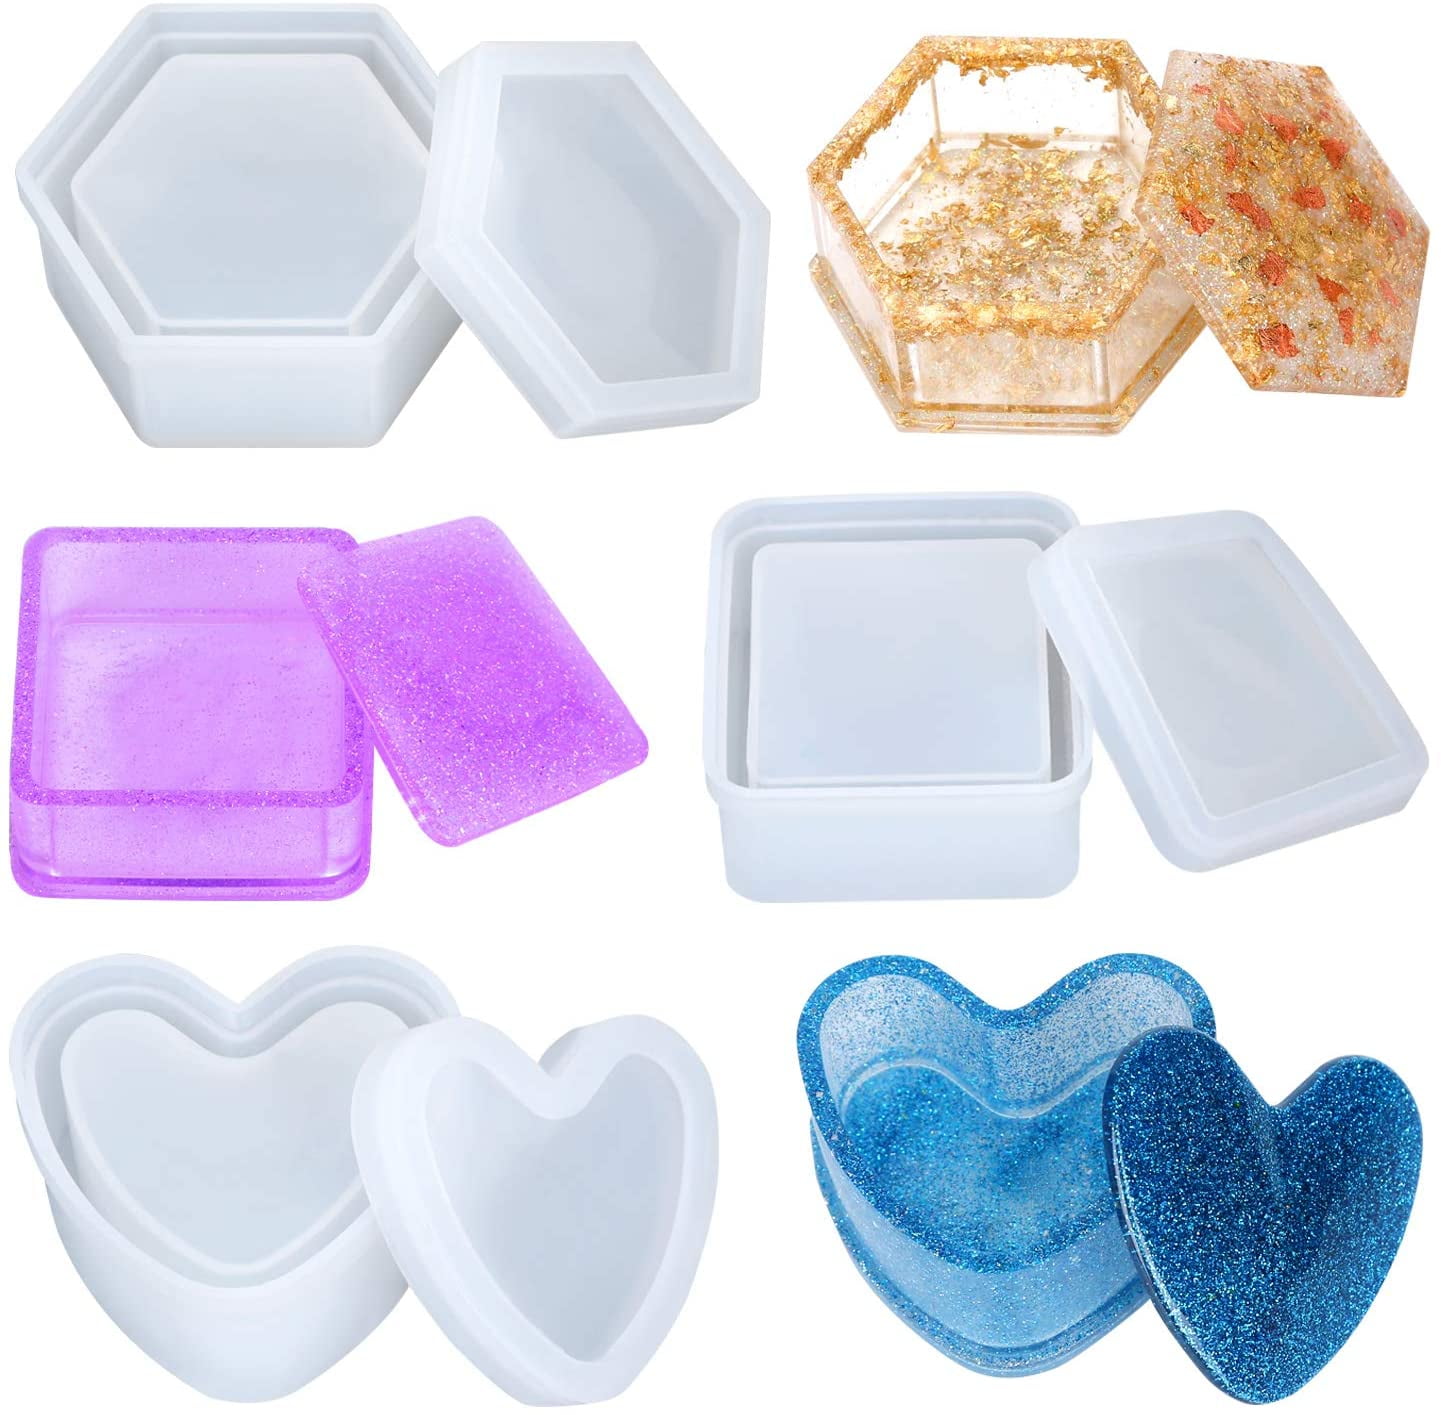 Flower Storage Box Silicone Mold Candle Holder Resin Mold Ashtray Mold Multi-functional Storage Box Crafts Mold DIY home decor,resin art diy